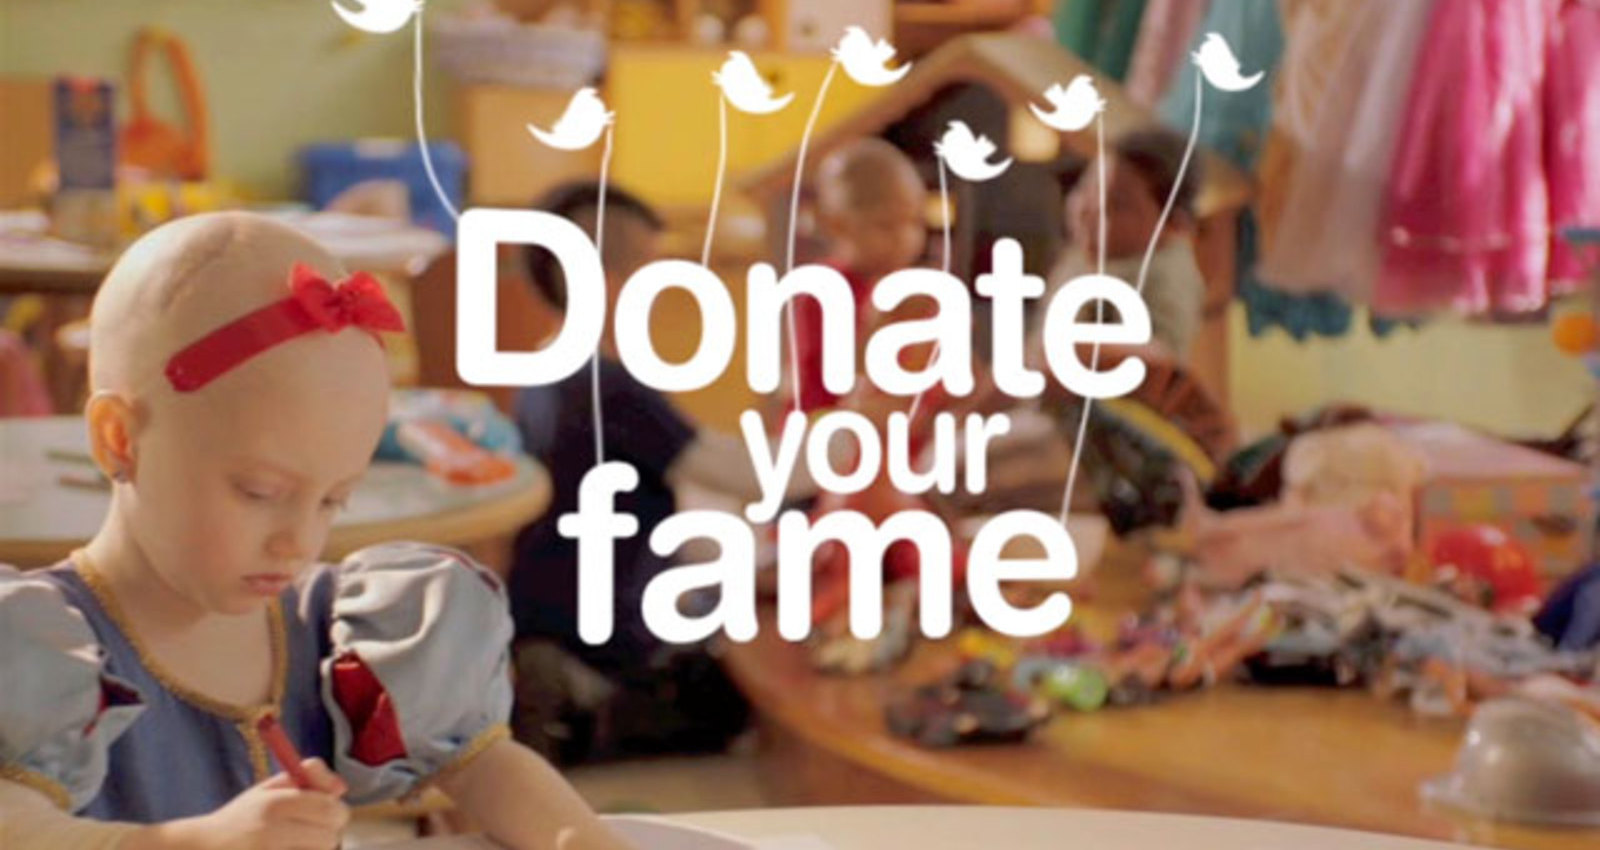 Donate Your Fame